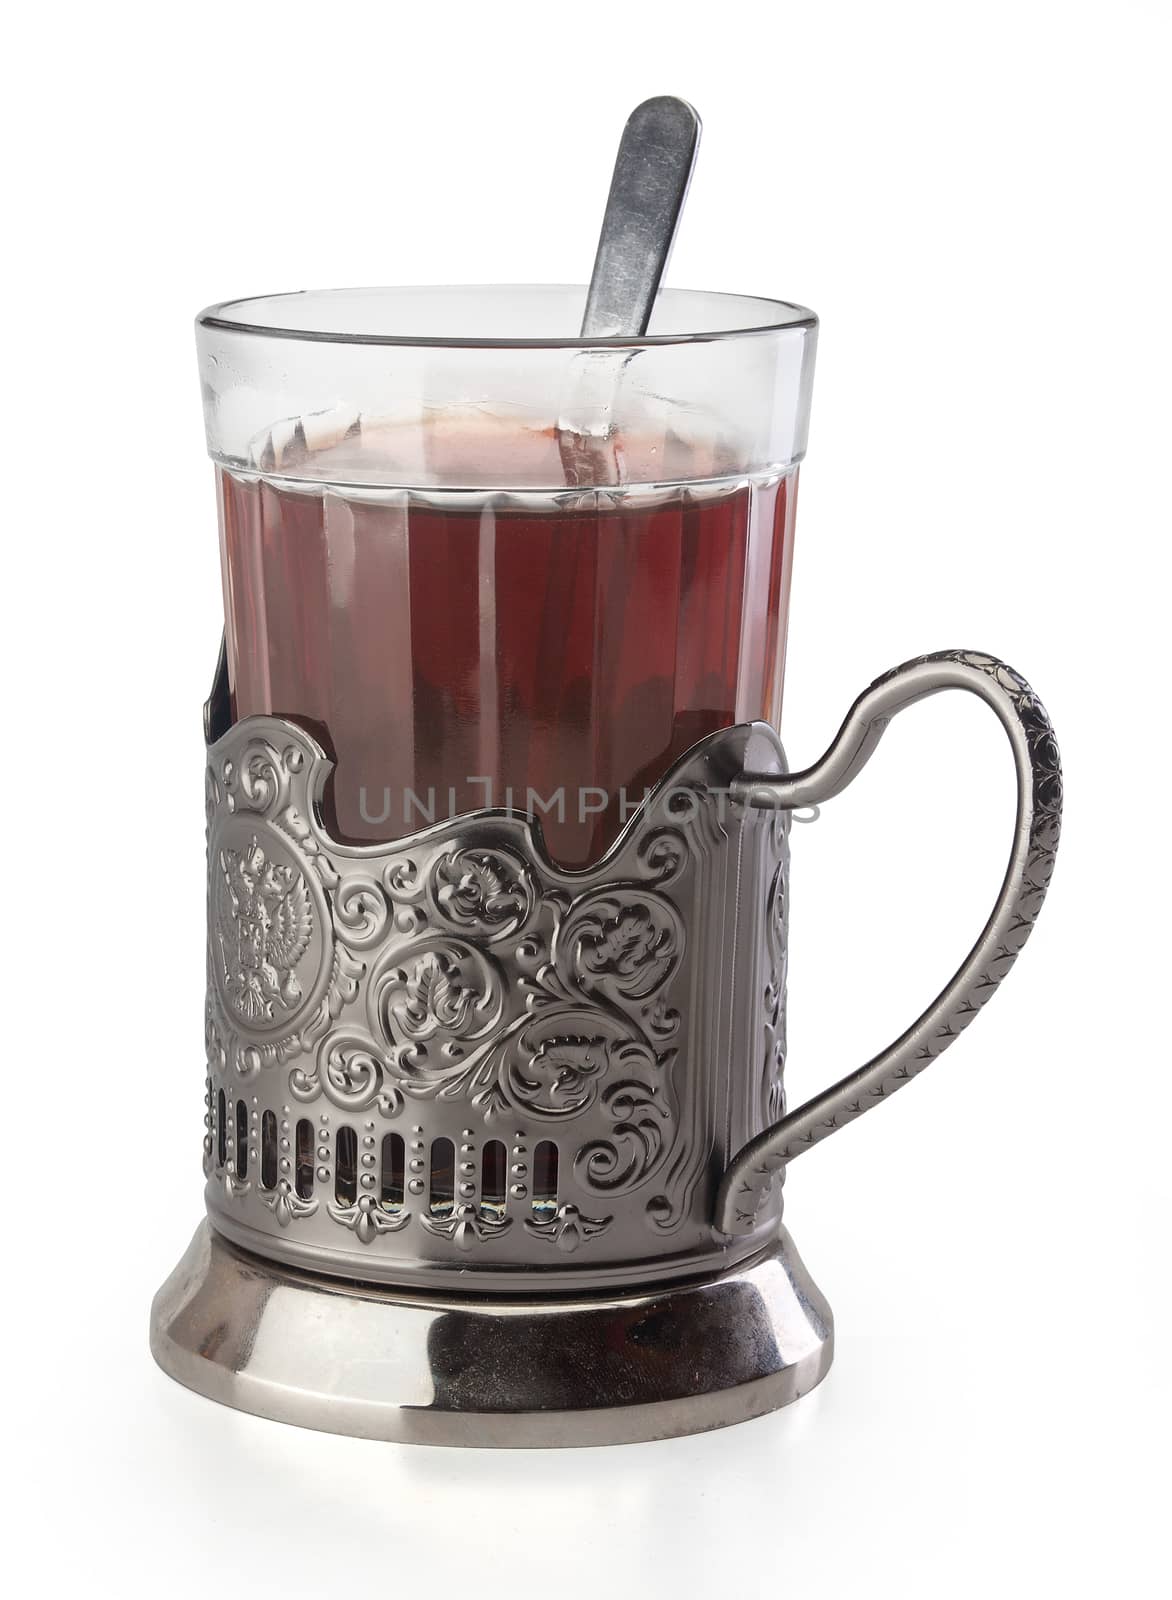 A cup of tea in the metal glass holder by Angorius